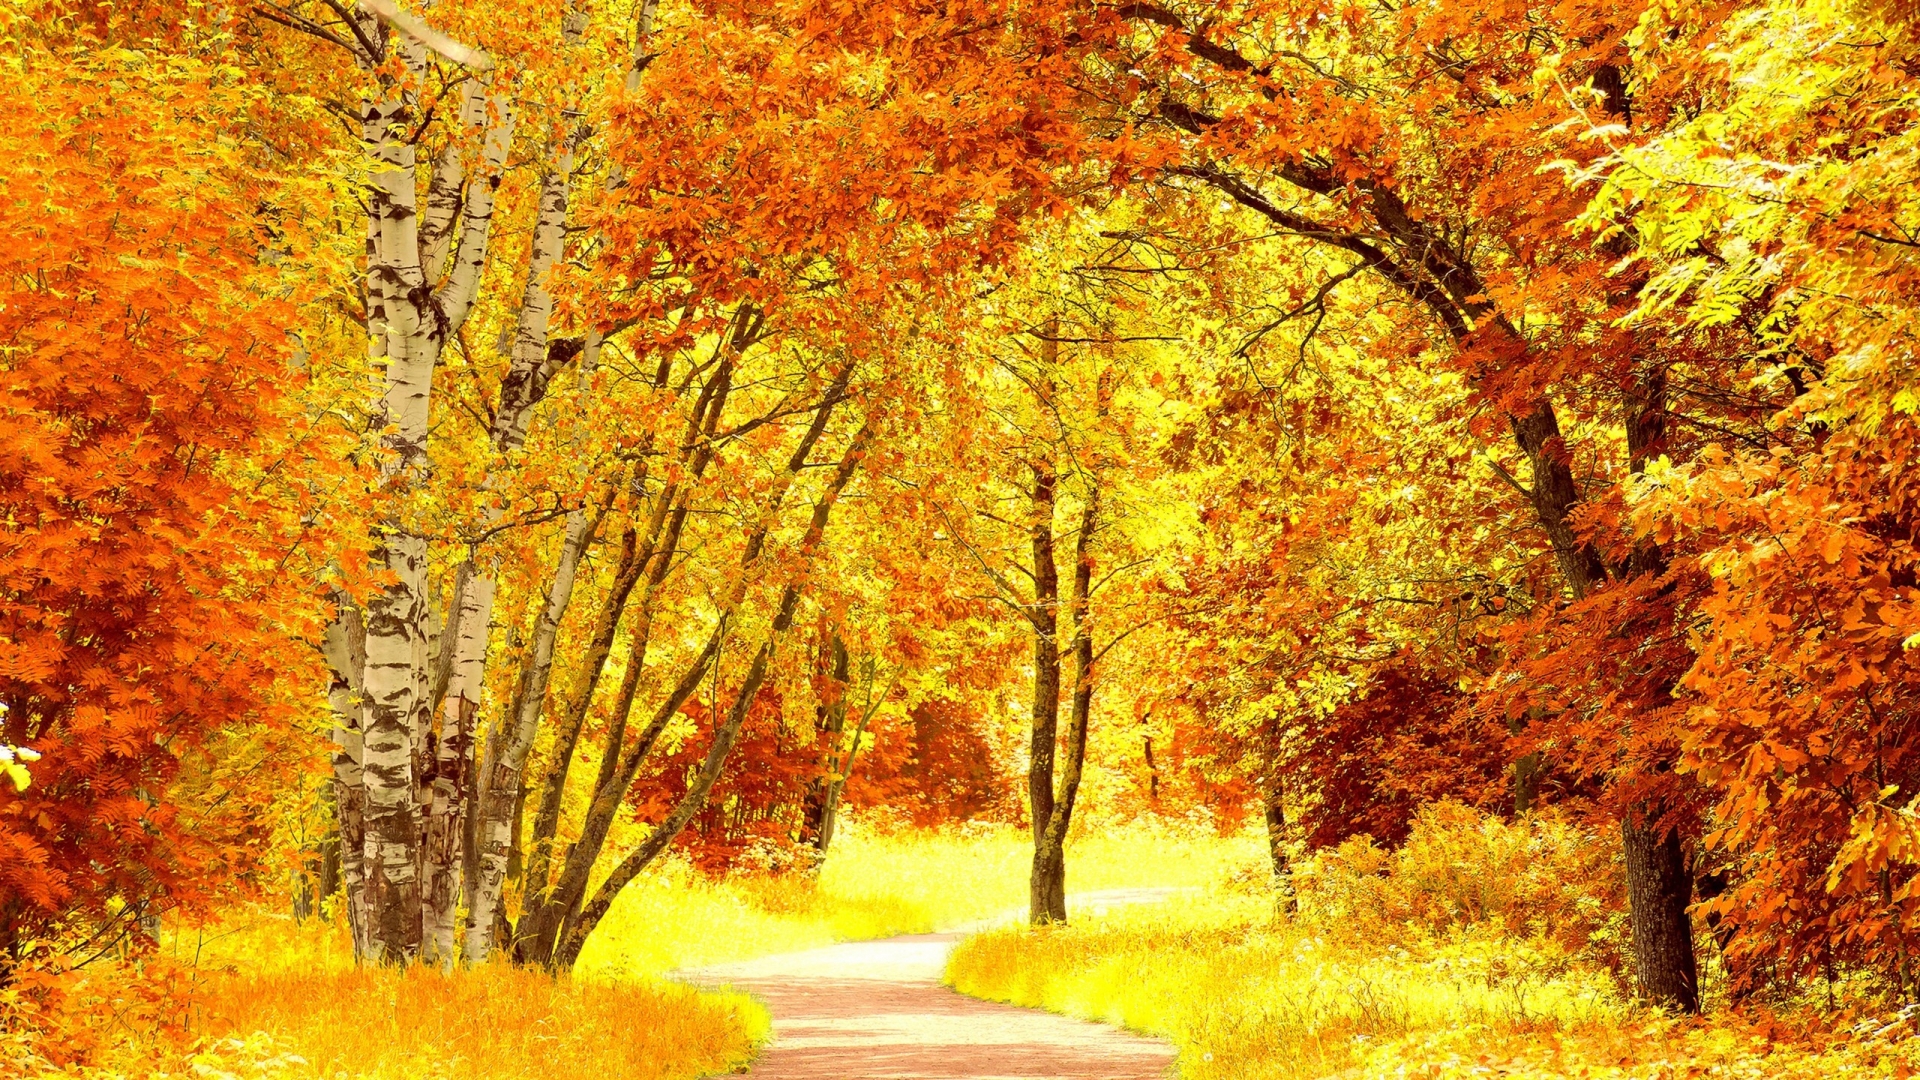 Yellow Autumn Landscape for 1920 x 1080 HDTV 1080p resolution